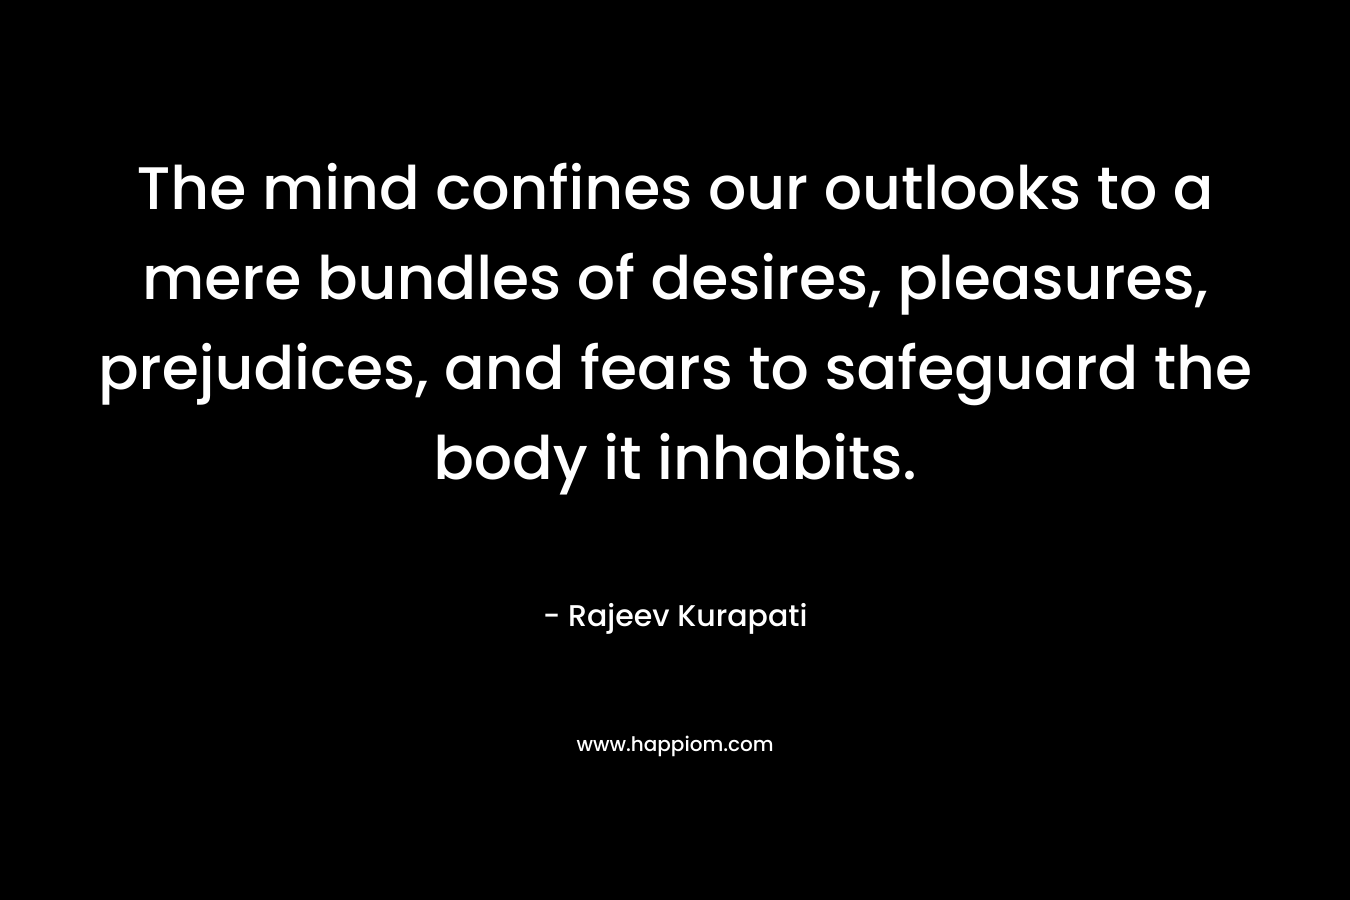 The mind confines our outlooks to a mere bundles of desires, pleasures, prejudices, and fears to safeguard the body it inhabits. – Rajeev Kurapati